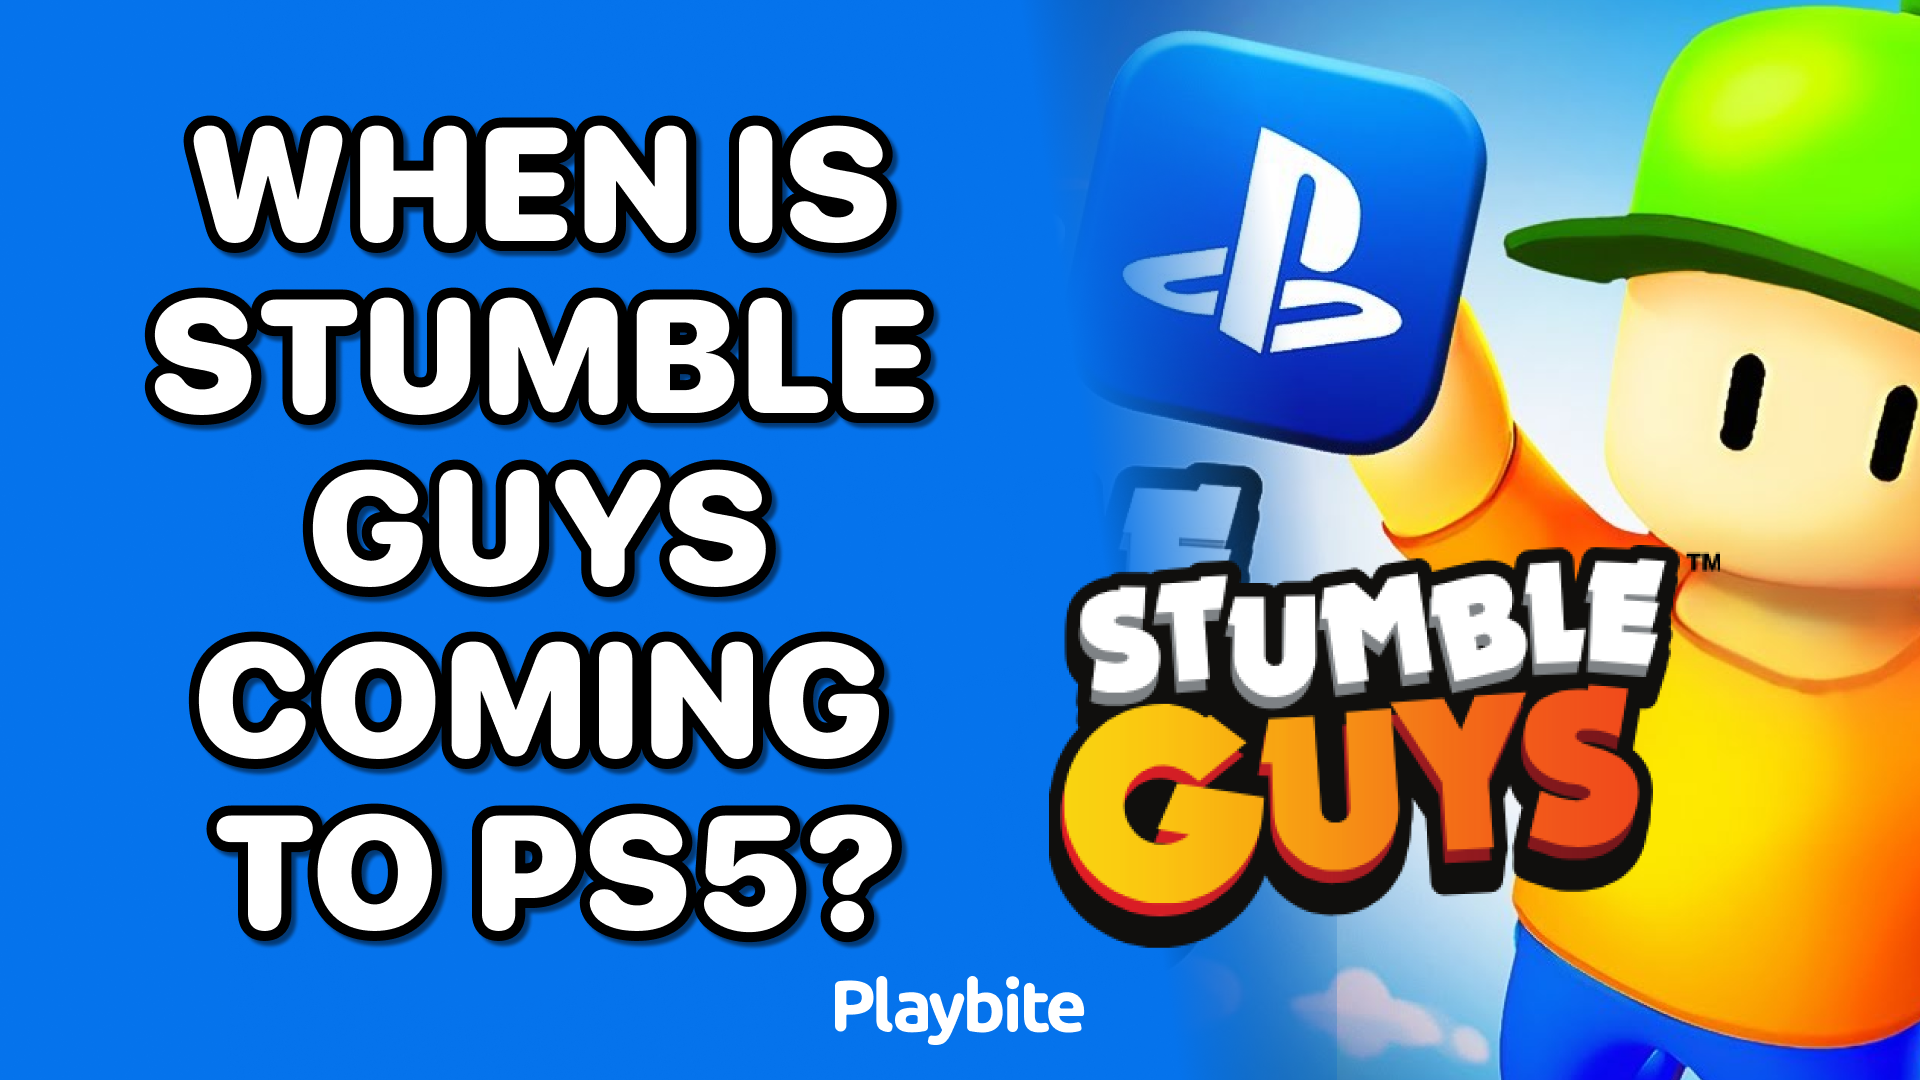 When Is Stumble Guys Coming to PS5?